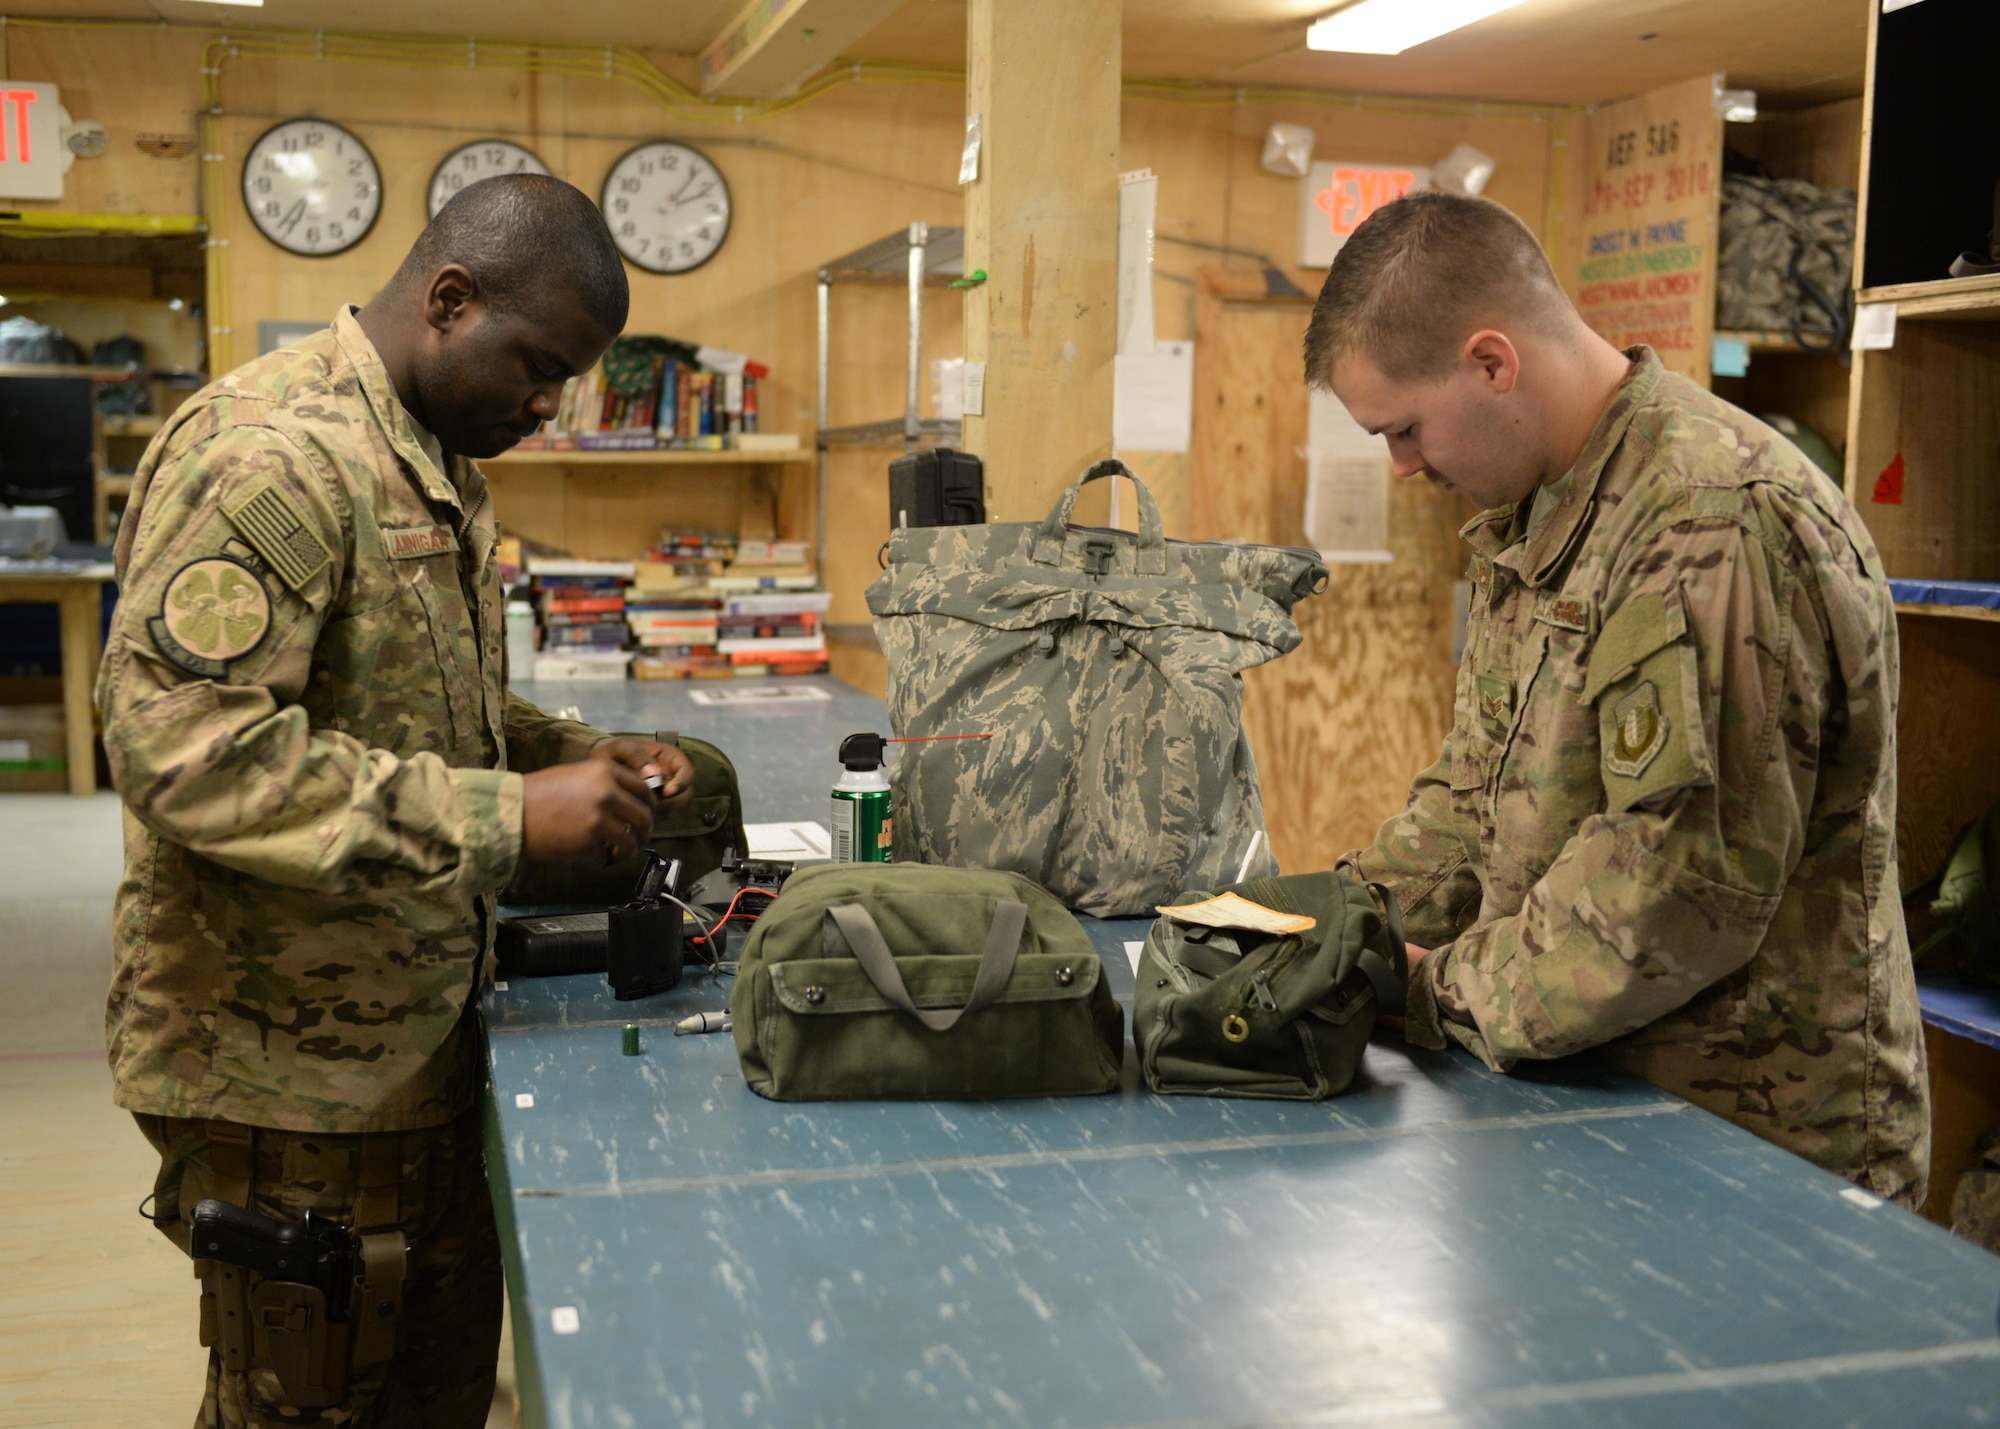 U.S. Air Force Senior Airman Greg Flannigan, 455th Expeditionary Airlift Squadron aircrew flight equipment journeyman, issues lifesaving equipment to a C-130 aircrew member July 17, 2015 at Bagram Airfield Afghanistan. Flannigan is responsible for making sure aircrews are supplied with lifesaving equipment prior to flying a mission here. (U.S. Air Force photo by Senior Airman Cierra Presentado/Released)